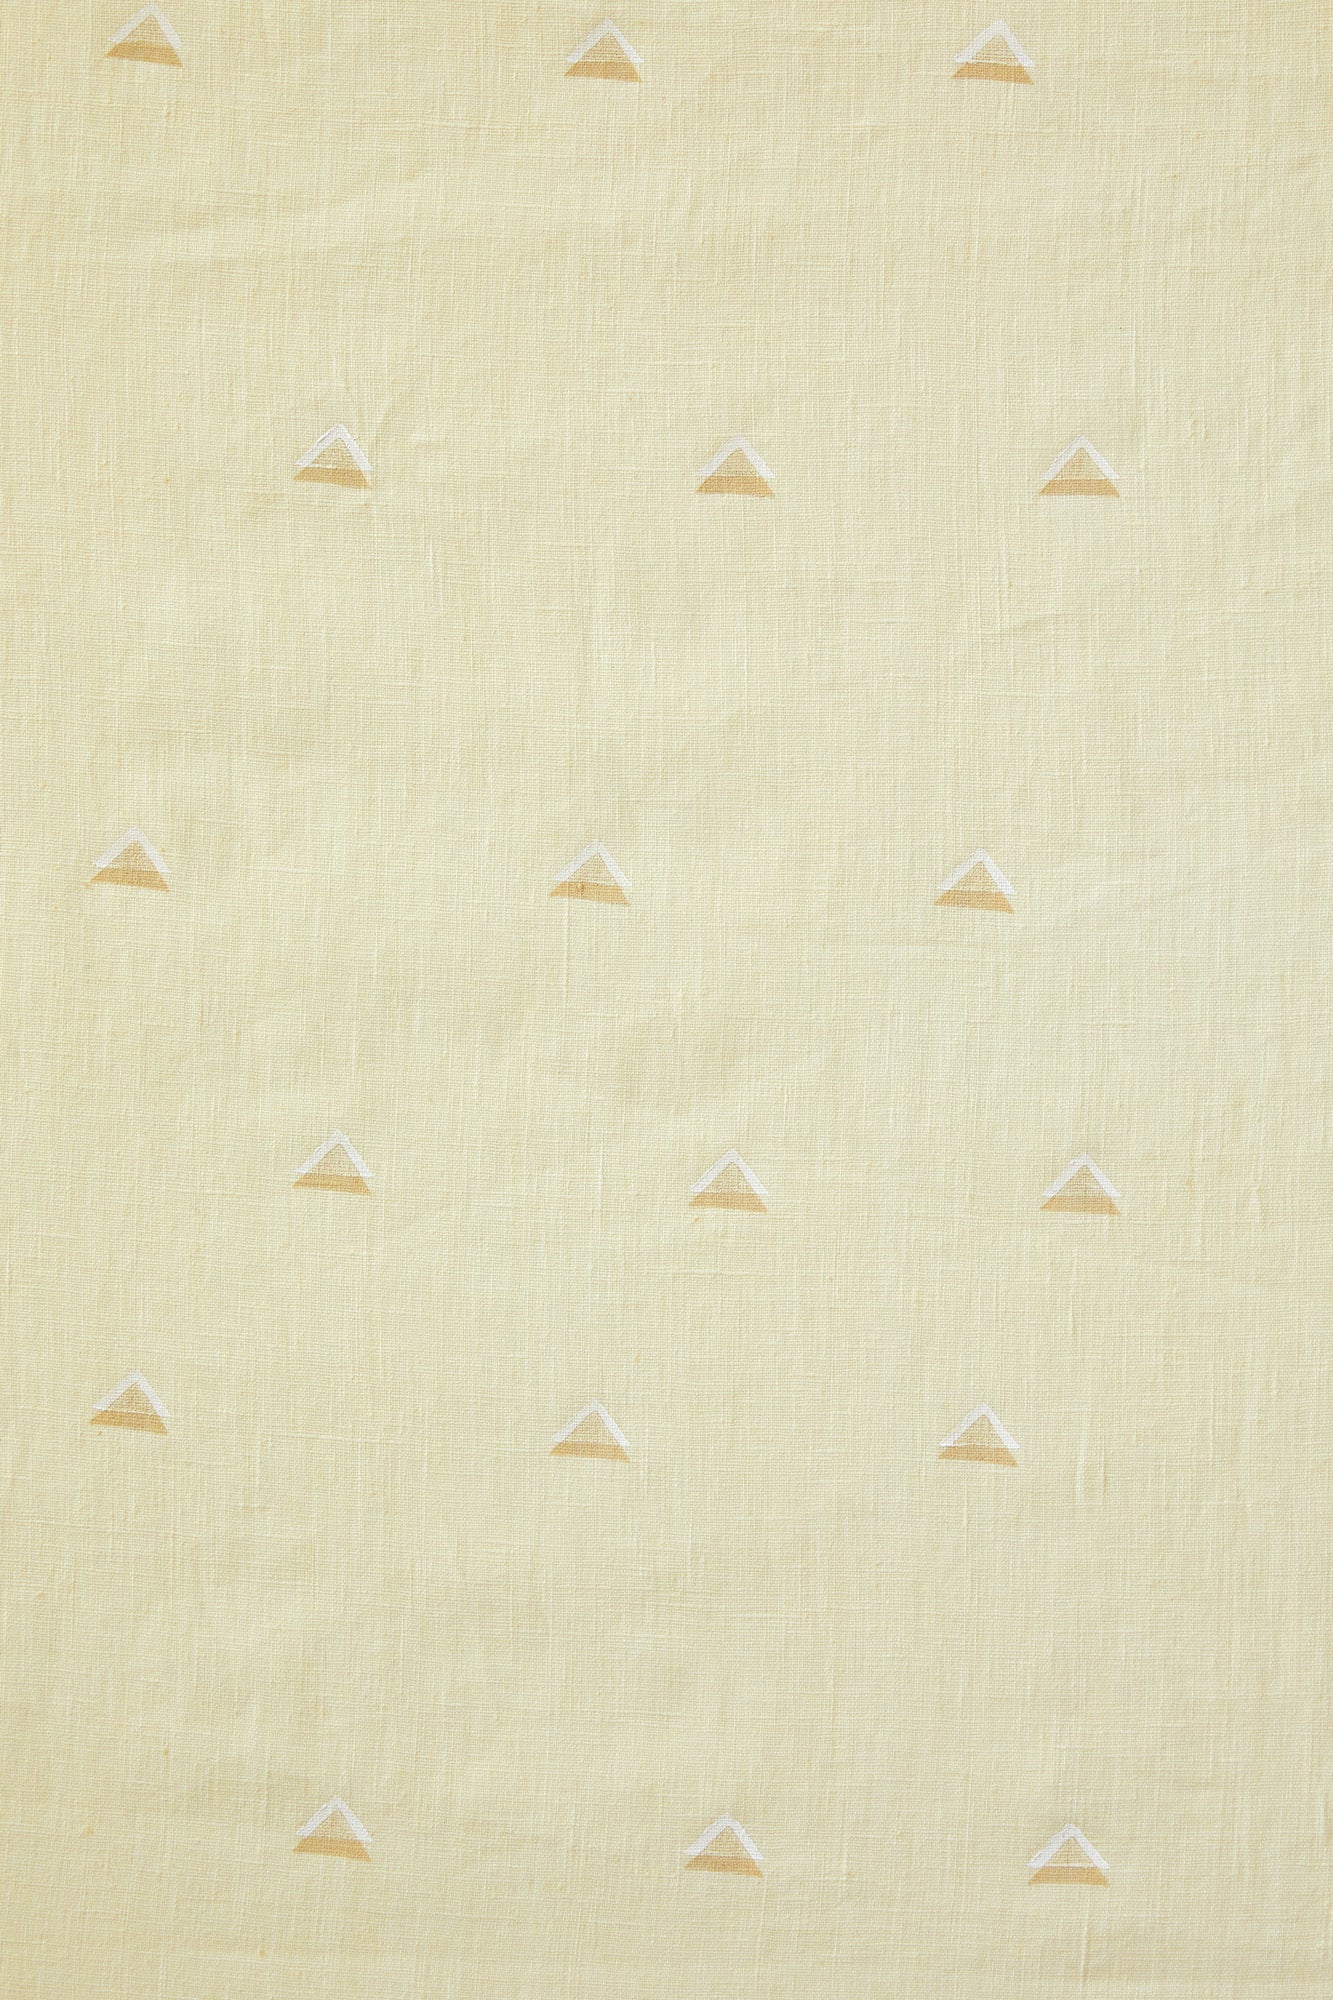 Double Triangle Sun - Fabric By The Yard